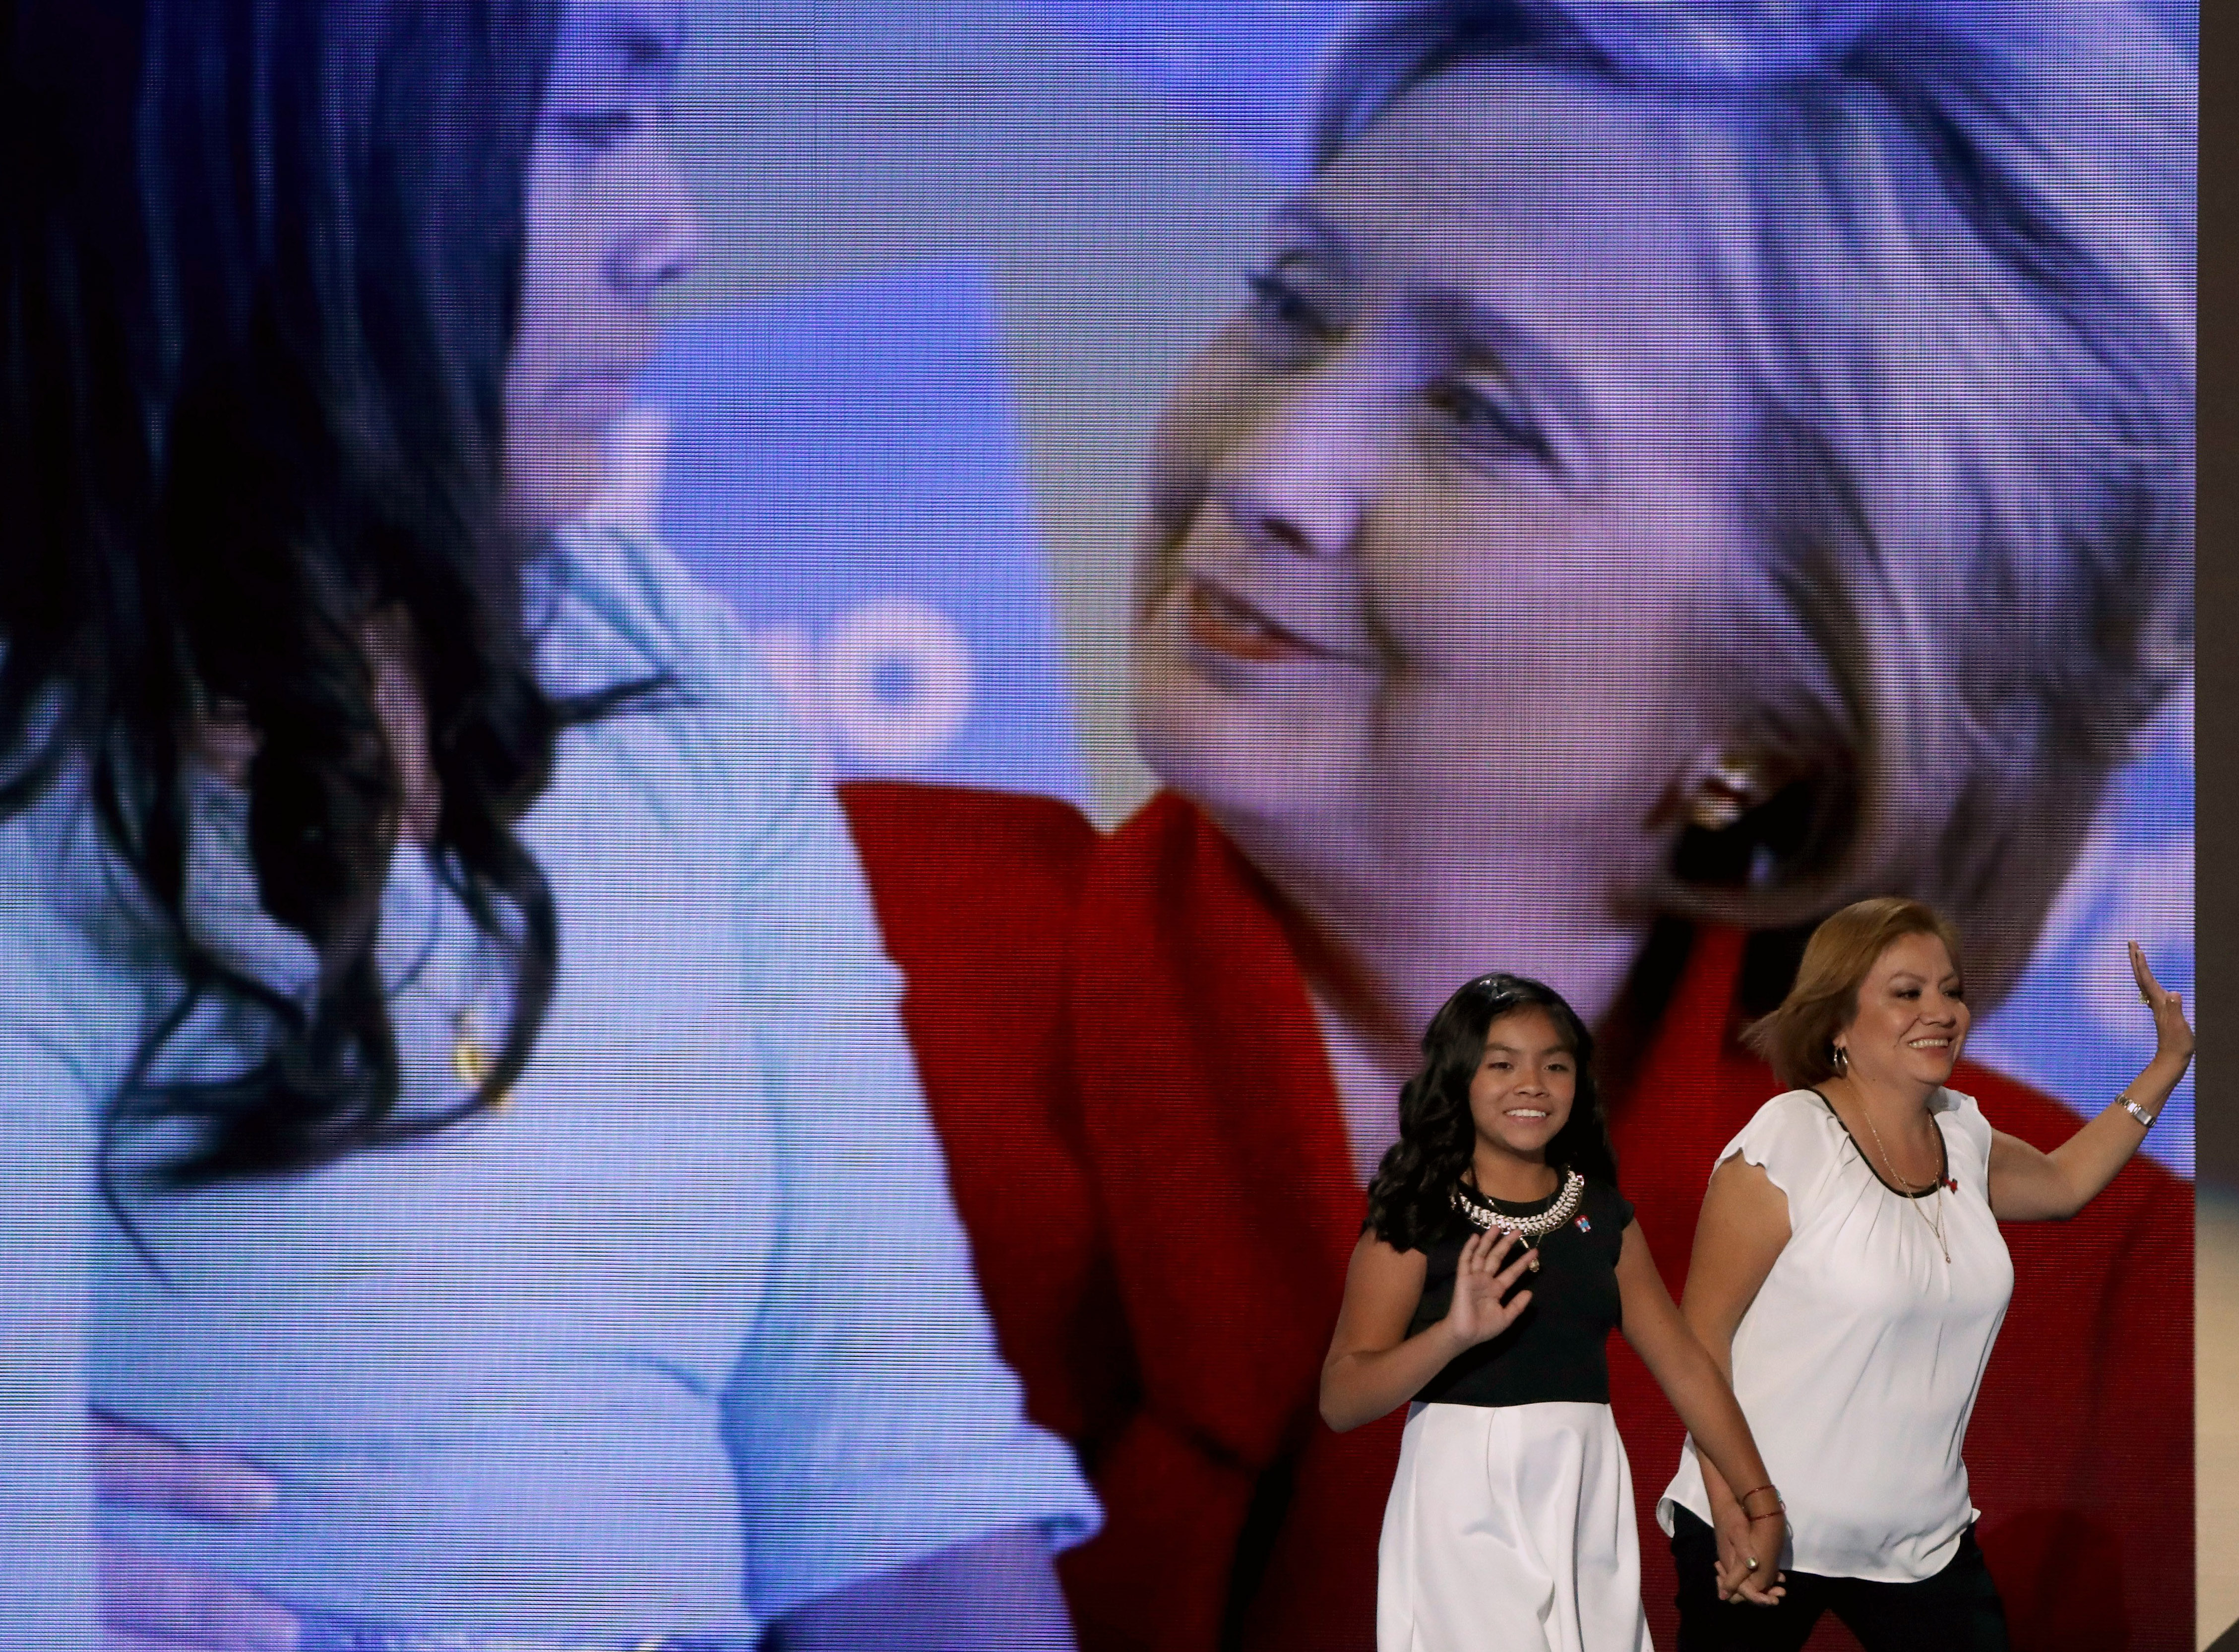 Karla Ortiz, 11, and her mother, Francisca Ortiz, walk out on stage to deliver remarks on the first day of the Democratic National Convention at the Wells Fargo Center, July 25, 2016 in Philadelphia. (Alex Wong—Getty Images)